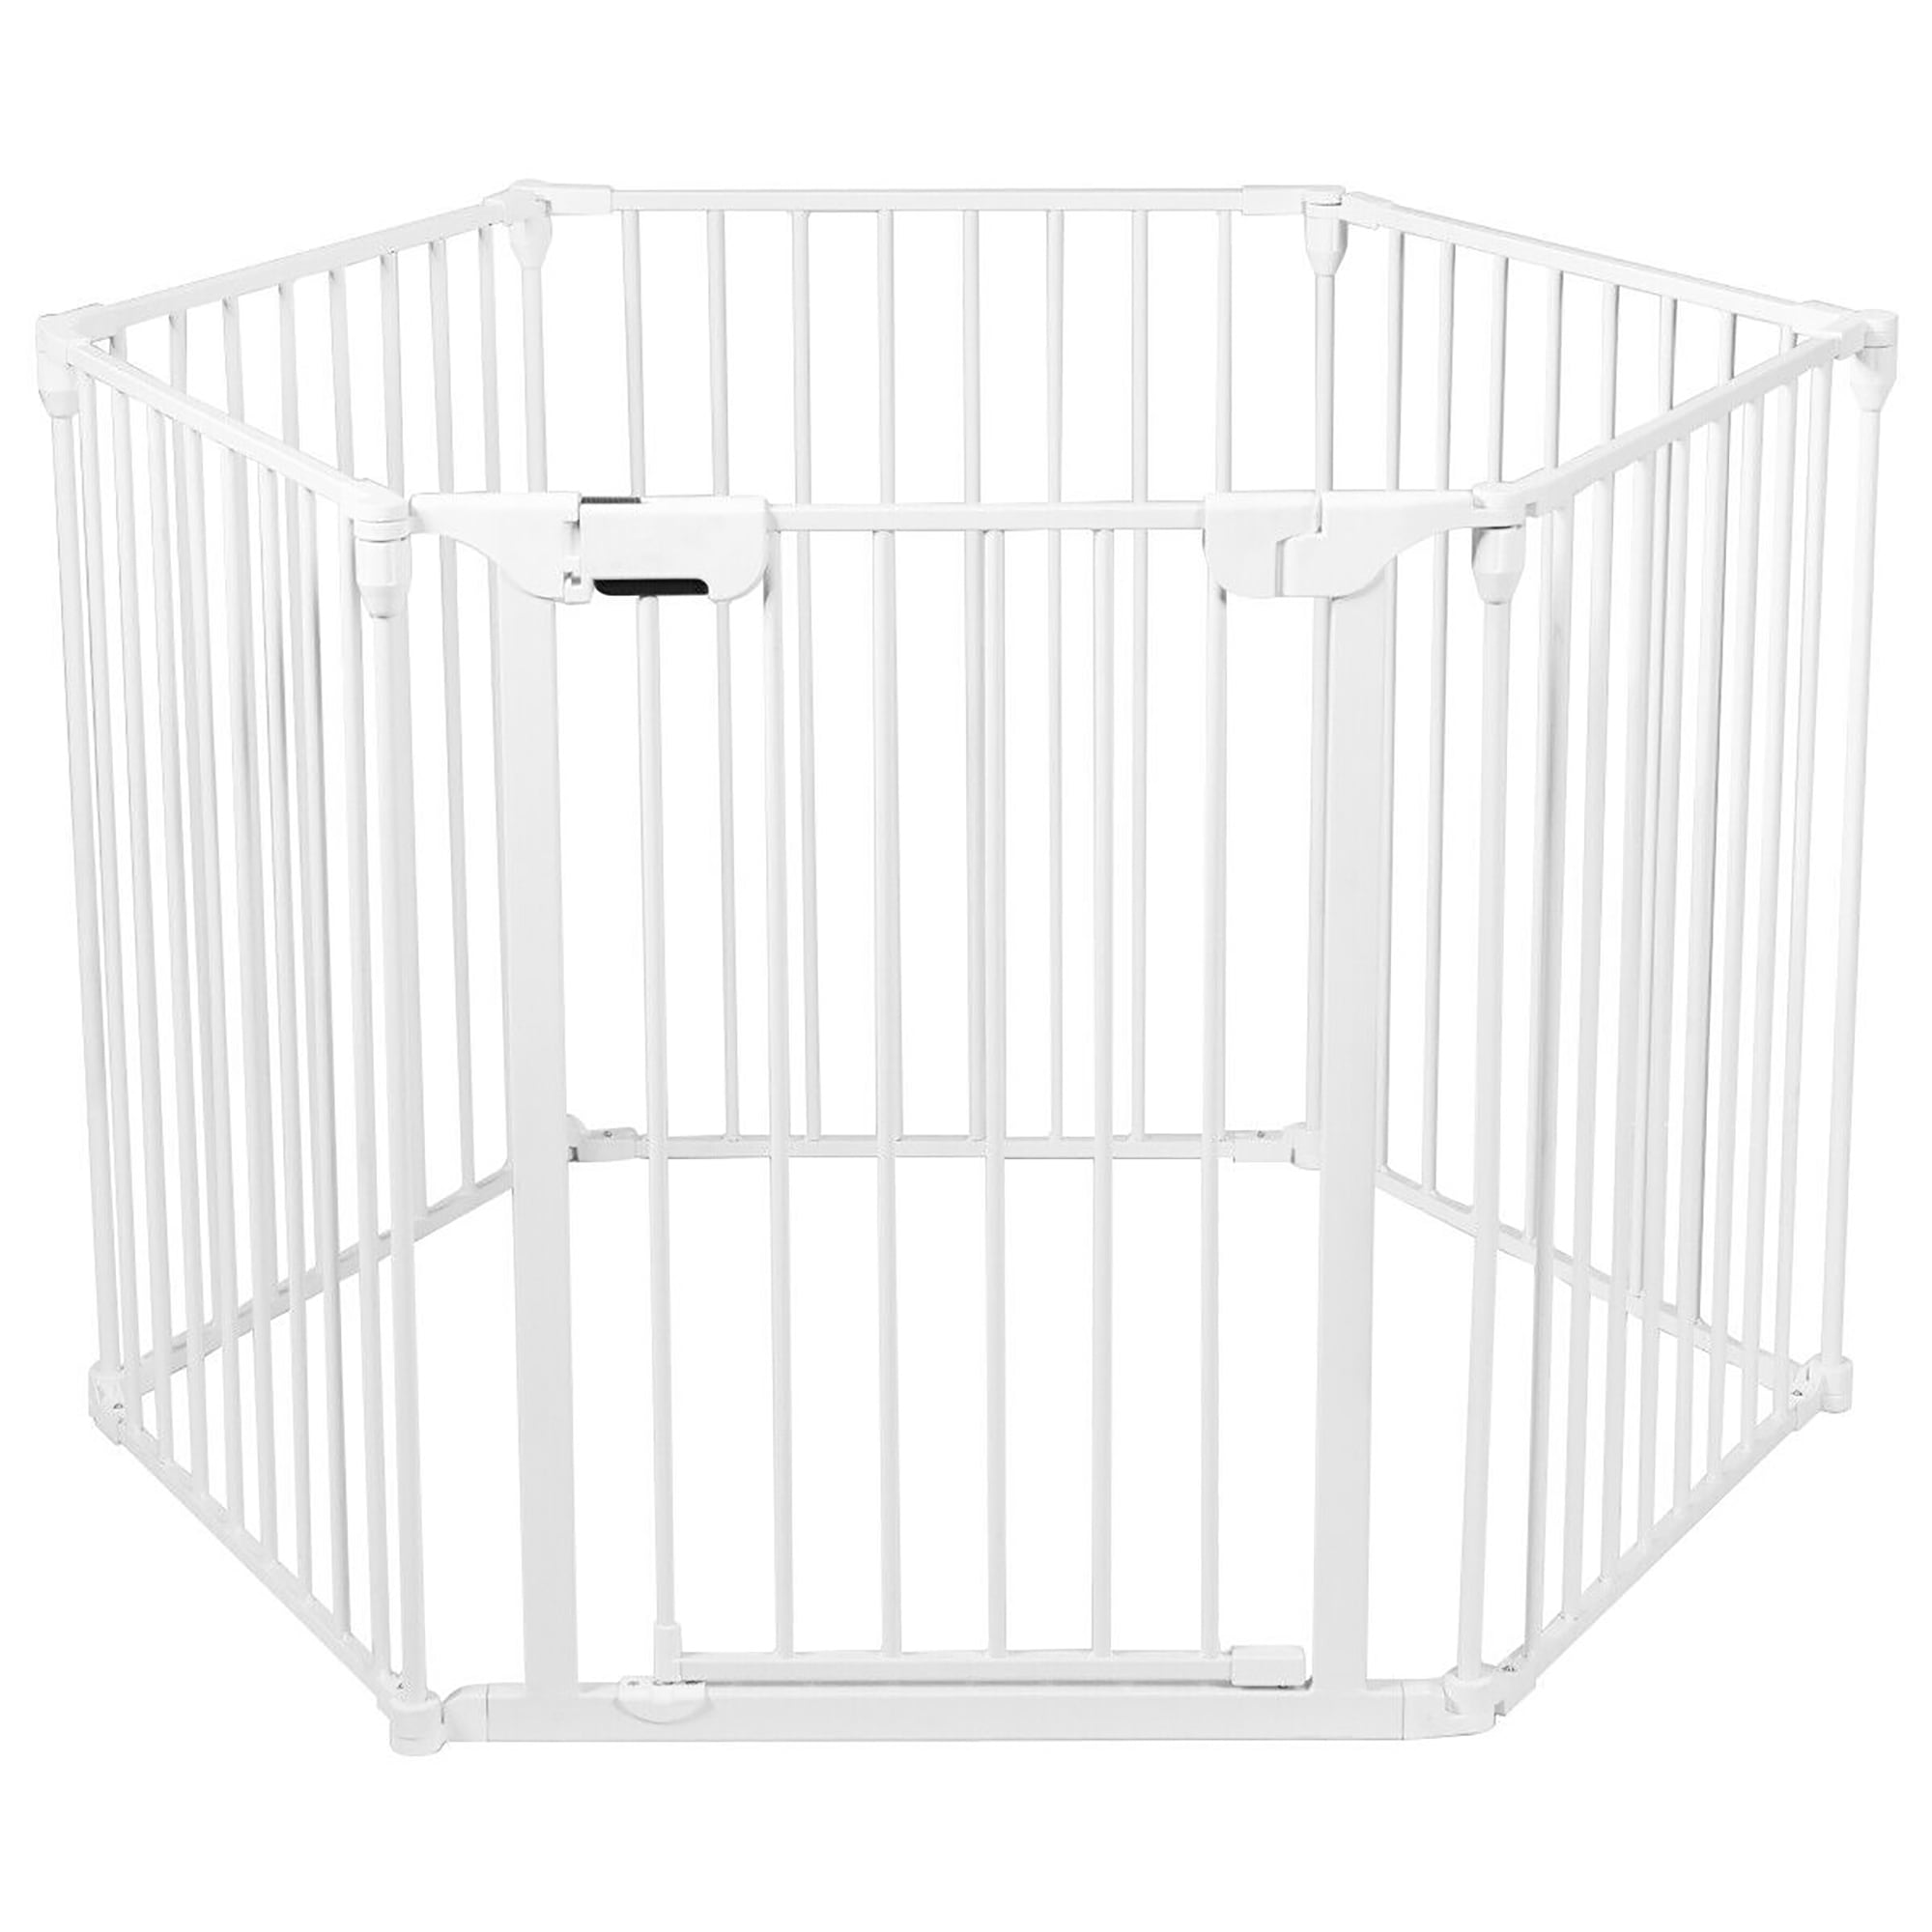 Pet Isolation Fence with Walk-Through Door BBQ Metal Fire Gate Costzon Fireplace Gate 6-Panel Foldable Pet Gates for Easy with Add/Decrease Panels 6-Panel, Black Freestanding Dog Gates